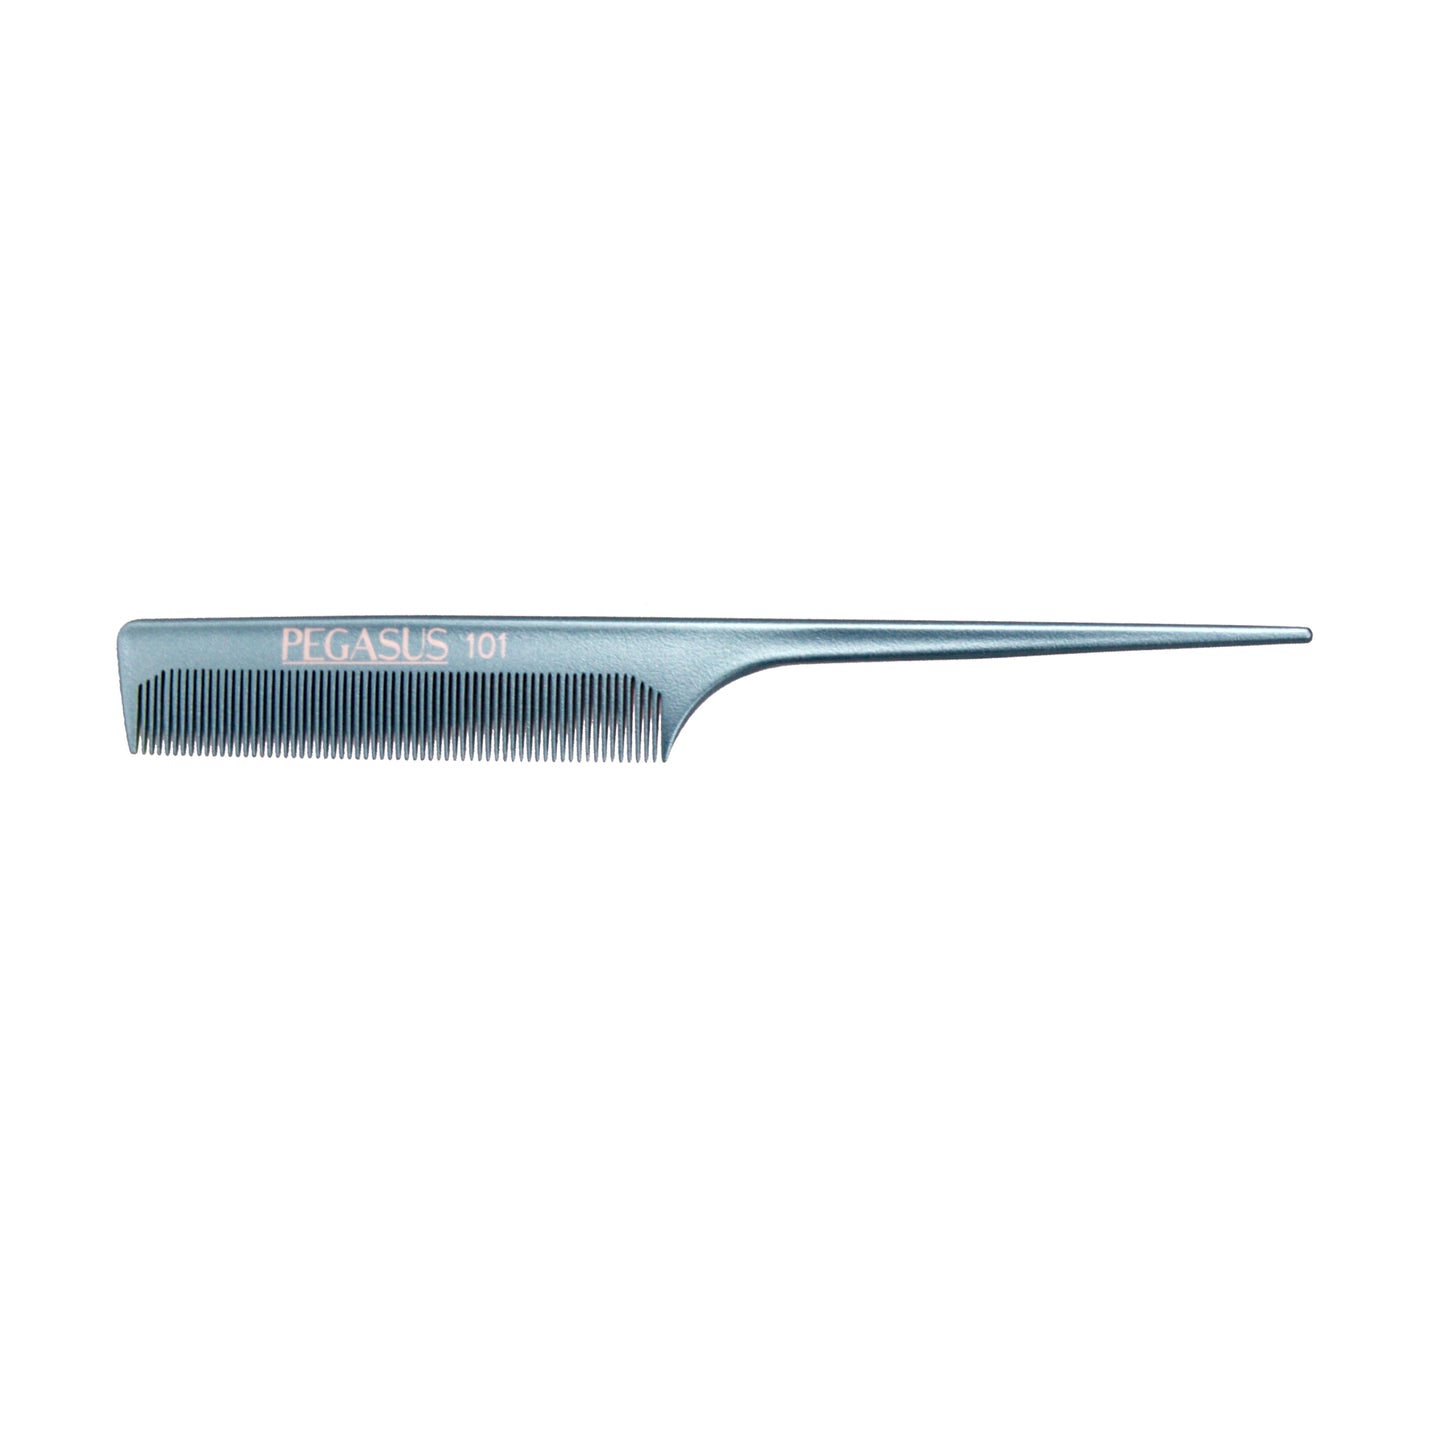 Pegasus MICOLOR 101, 8in Hard Rubber Fine Tooth Rat Tail Comb, Handmade, Seamless, Smooth Edges, Anti Static, Heat and Chemically Resistant, Great for Parting, Coloring Hair | Peines de goma dura - Blue